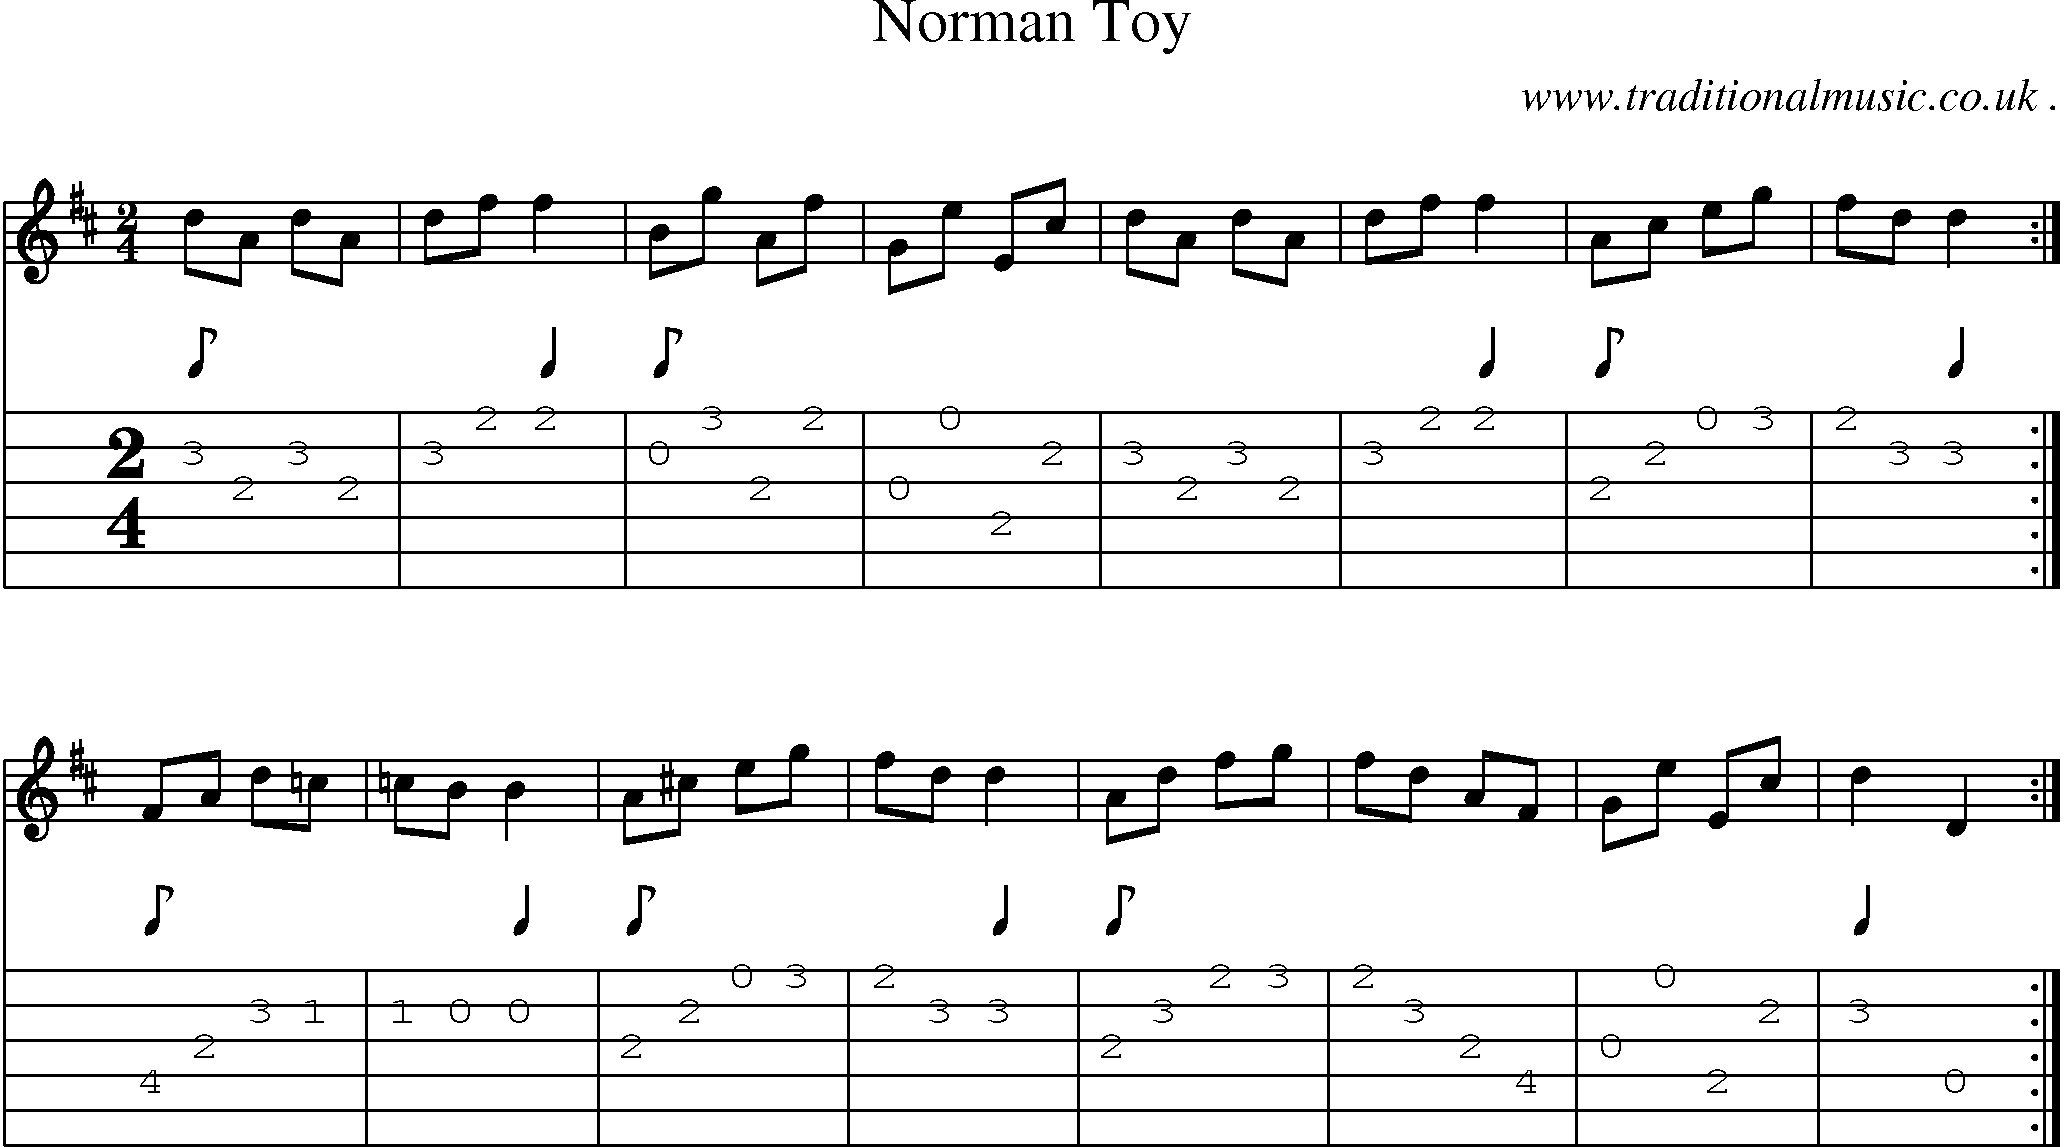 Music Score and Guitar Tabs for Norman Toy